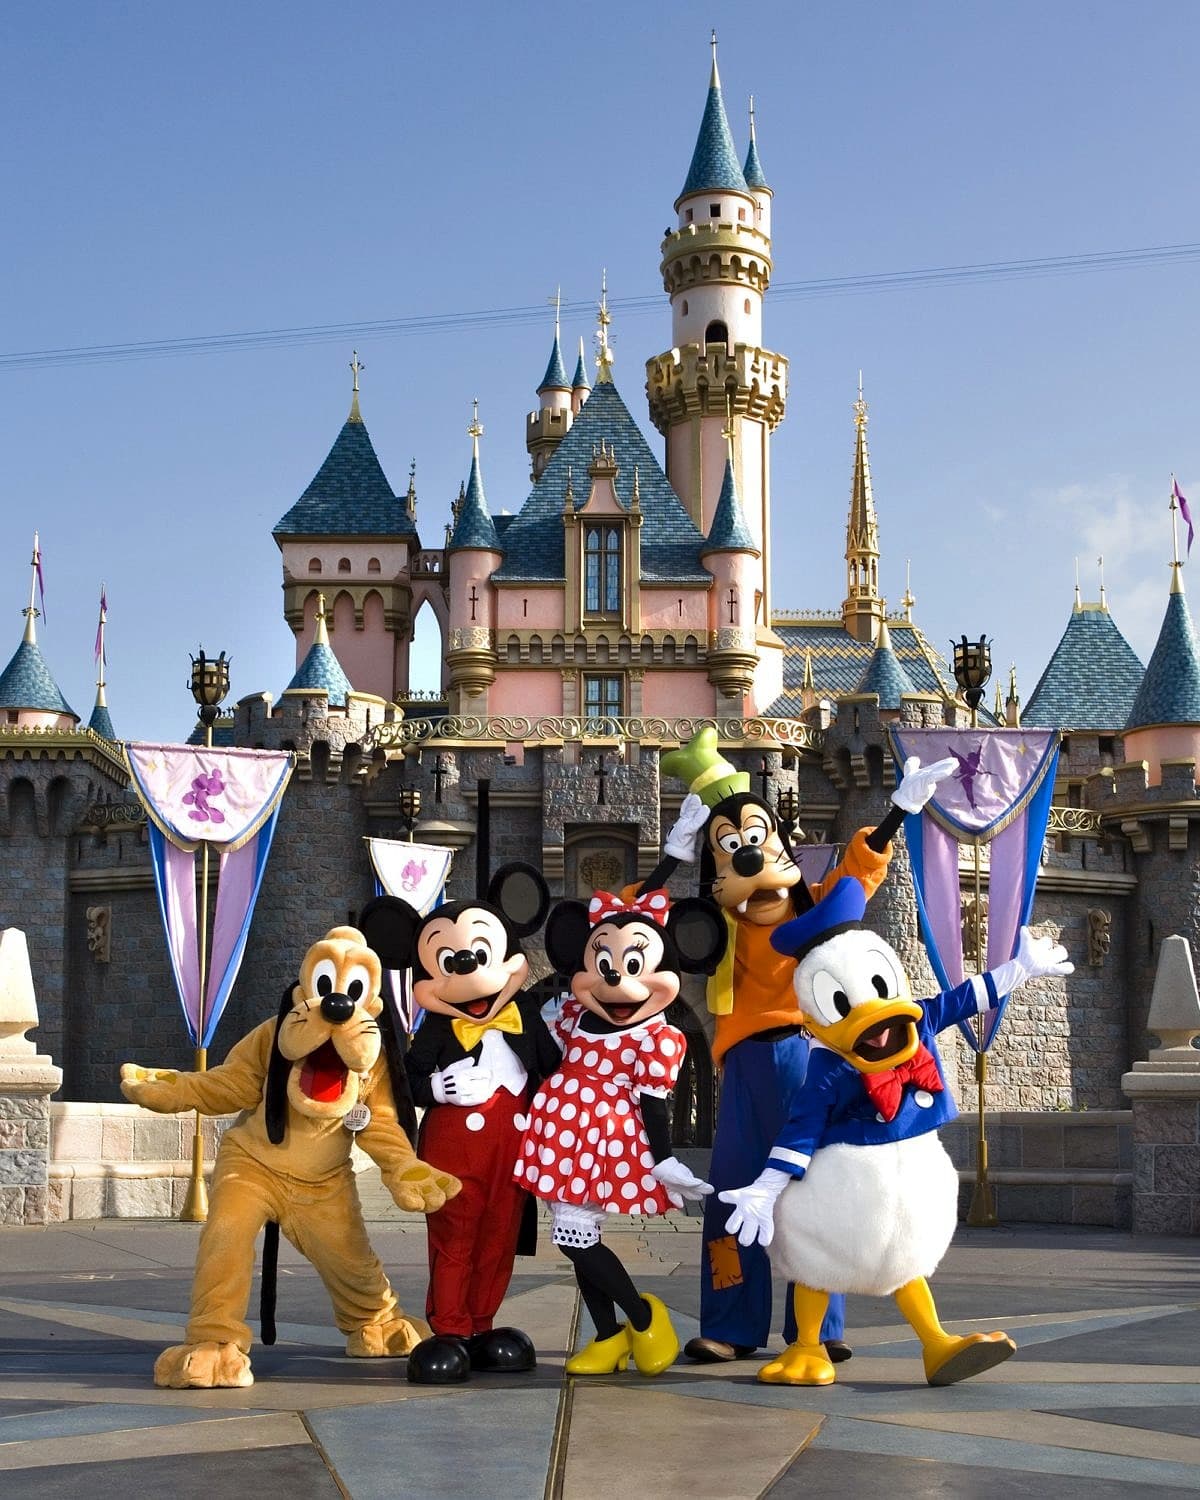 Mickey Mouse and friends in front of Sleeping Beauty's Castle at Disneyland 